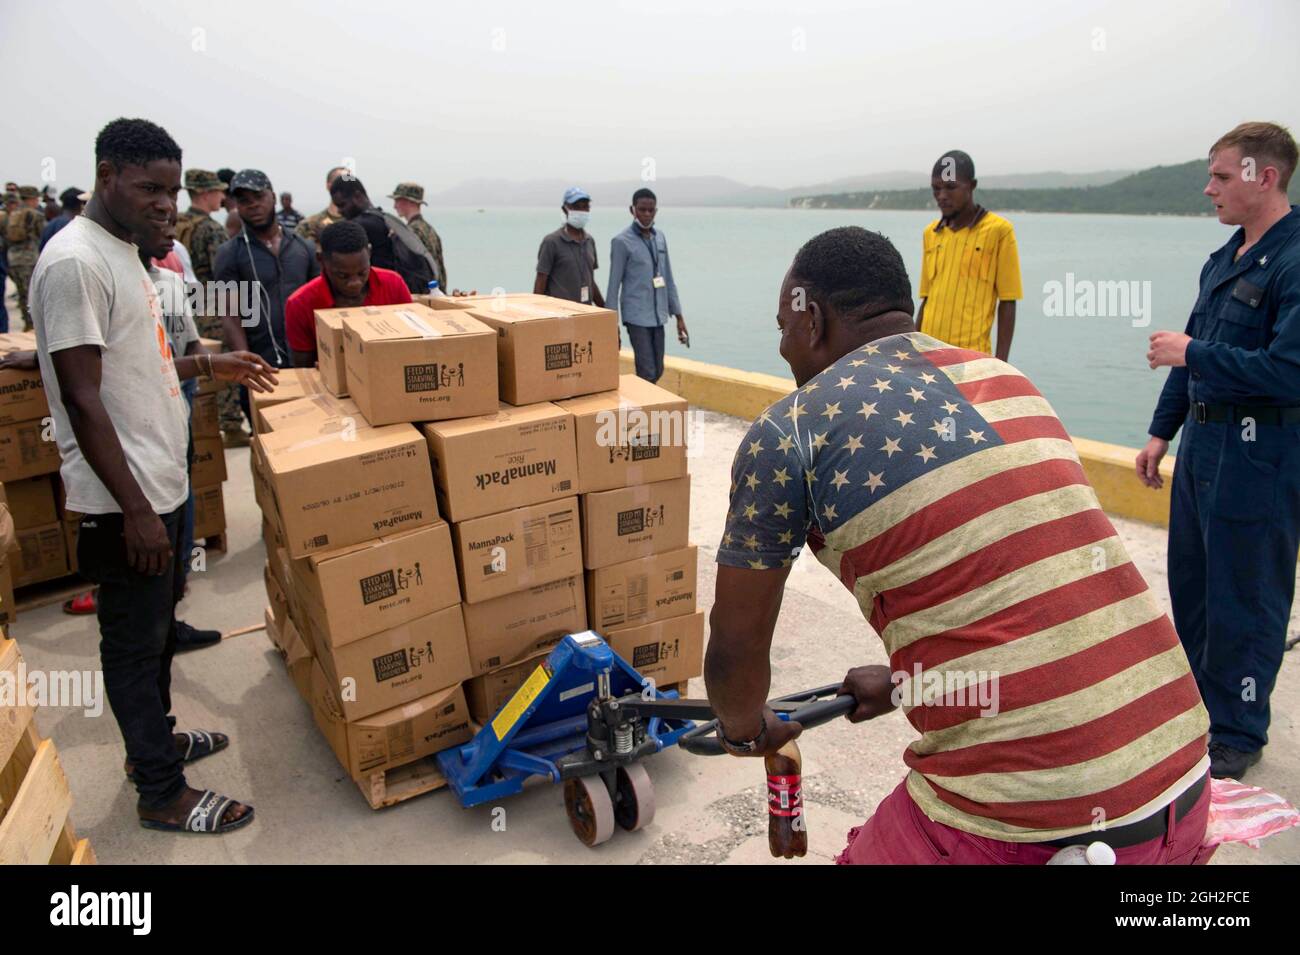 U.S. Marines, sailors and volunteers unloaded food supplies from a landing craft at the port of Jeremie during a humanitarian mission August 31, 2021 in Jeremie, Haiti. The military, USAID and volunteers are assisting in the aftermath of the recent earthquake. Stock Photo